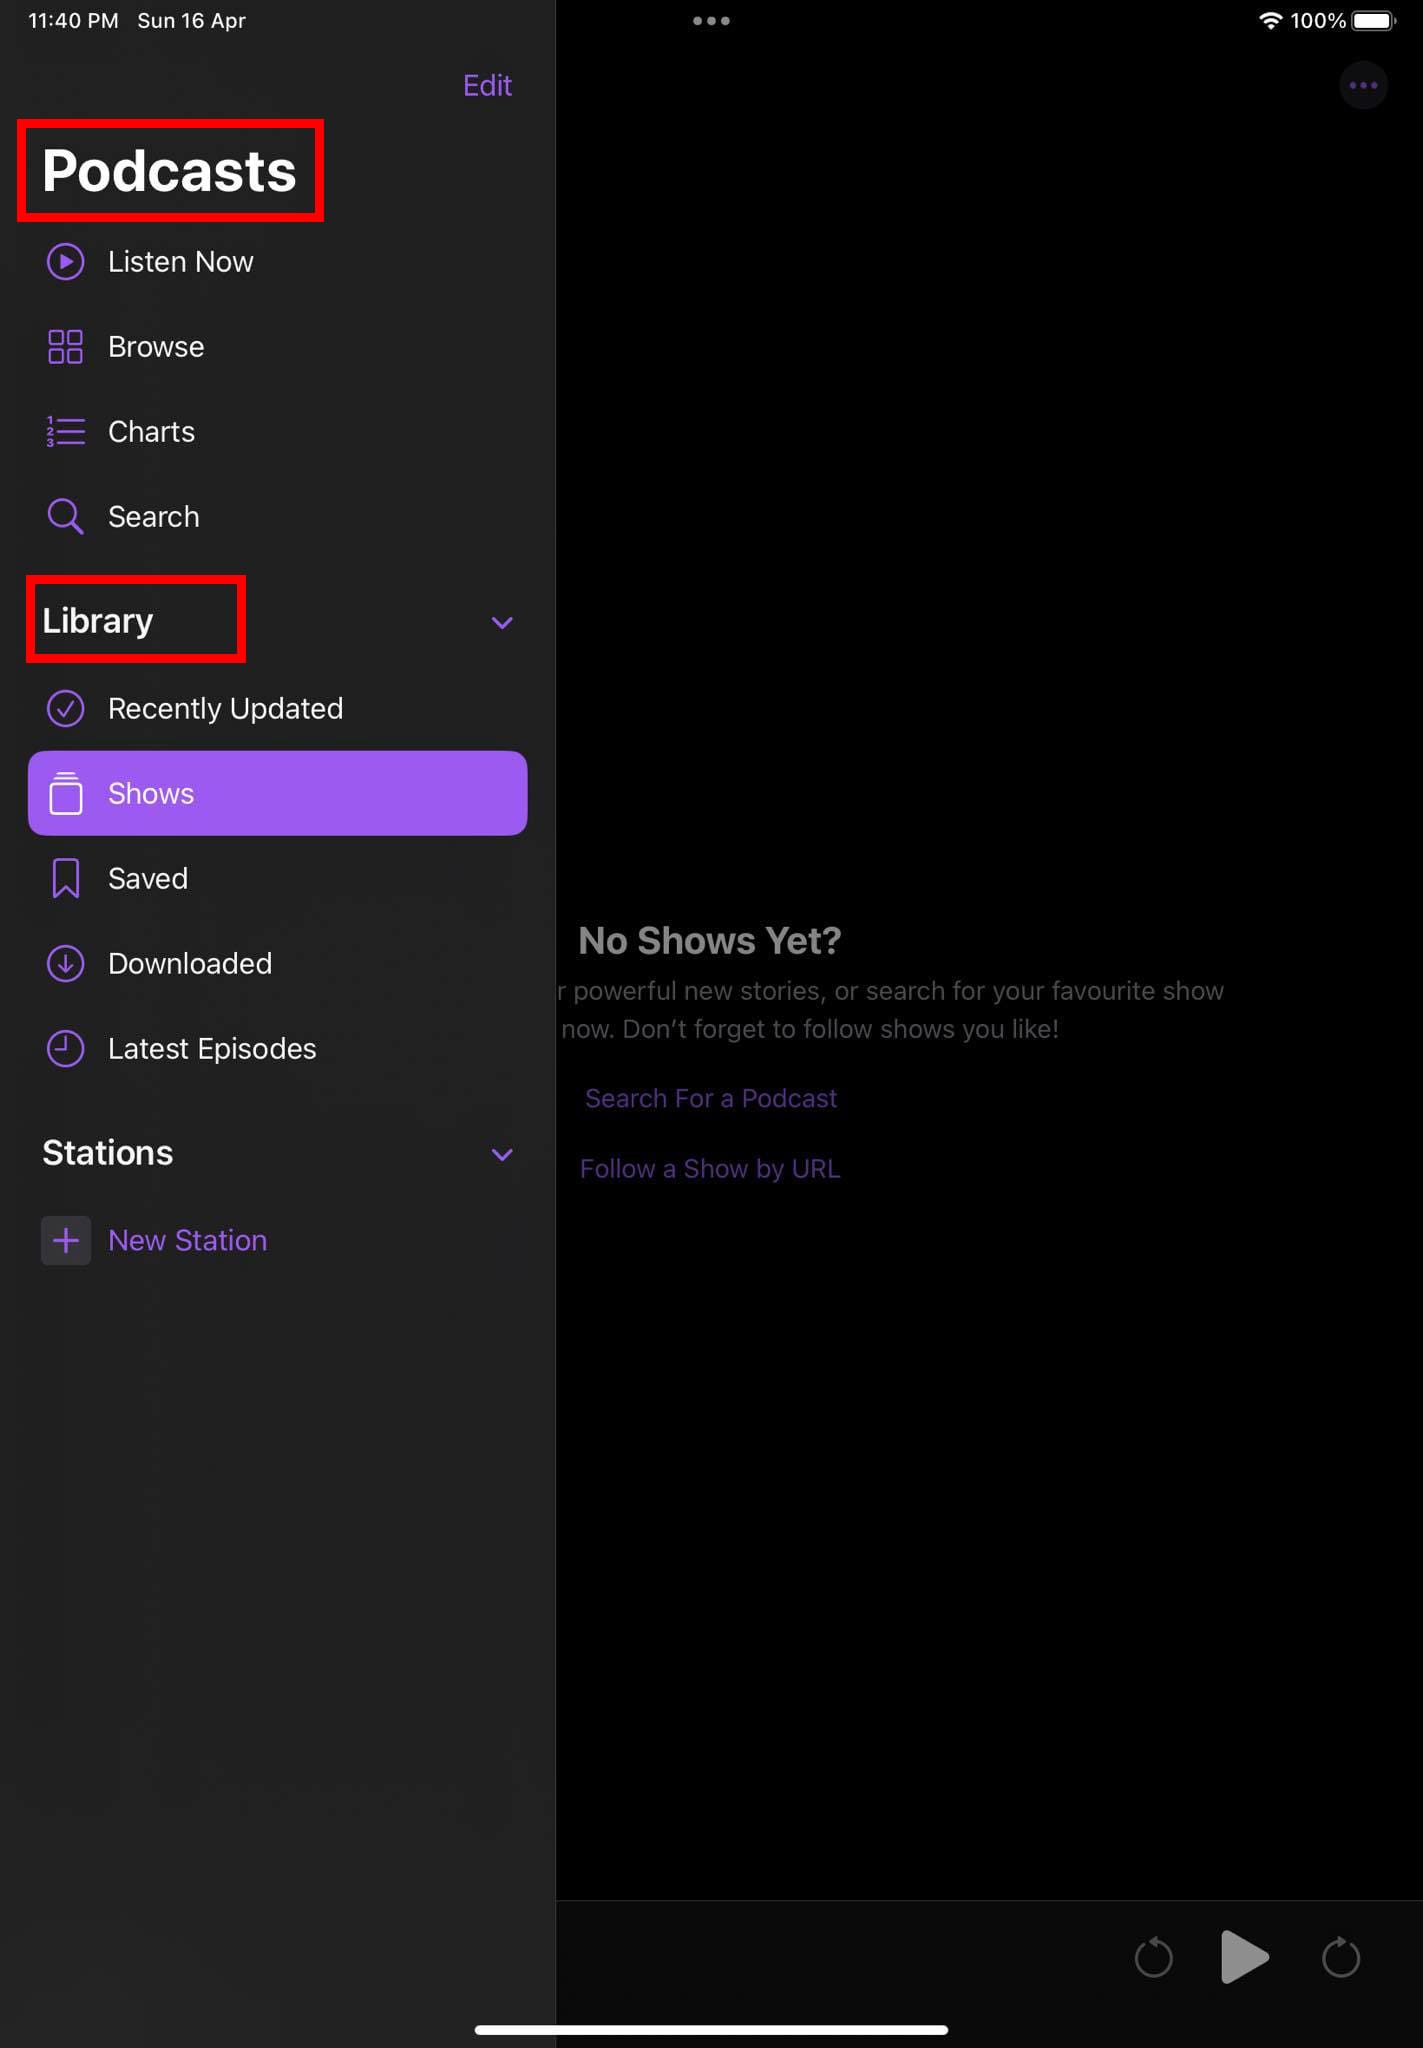 The Podcasts app sidebar showing Library